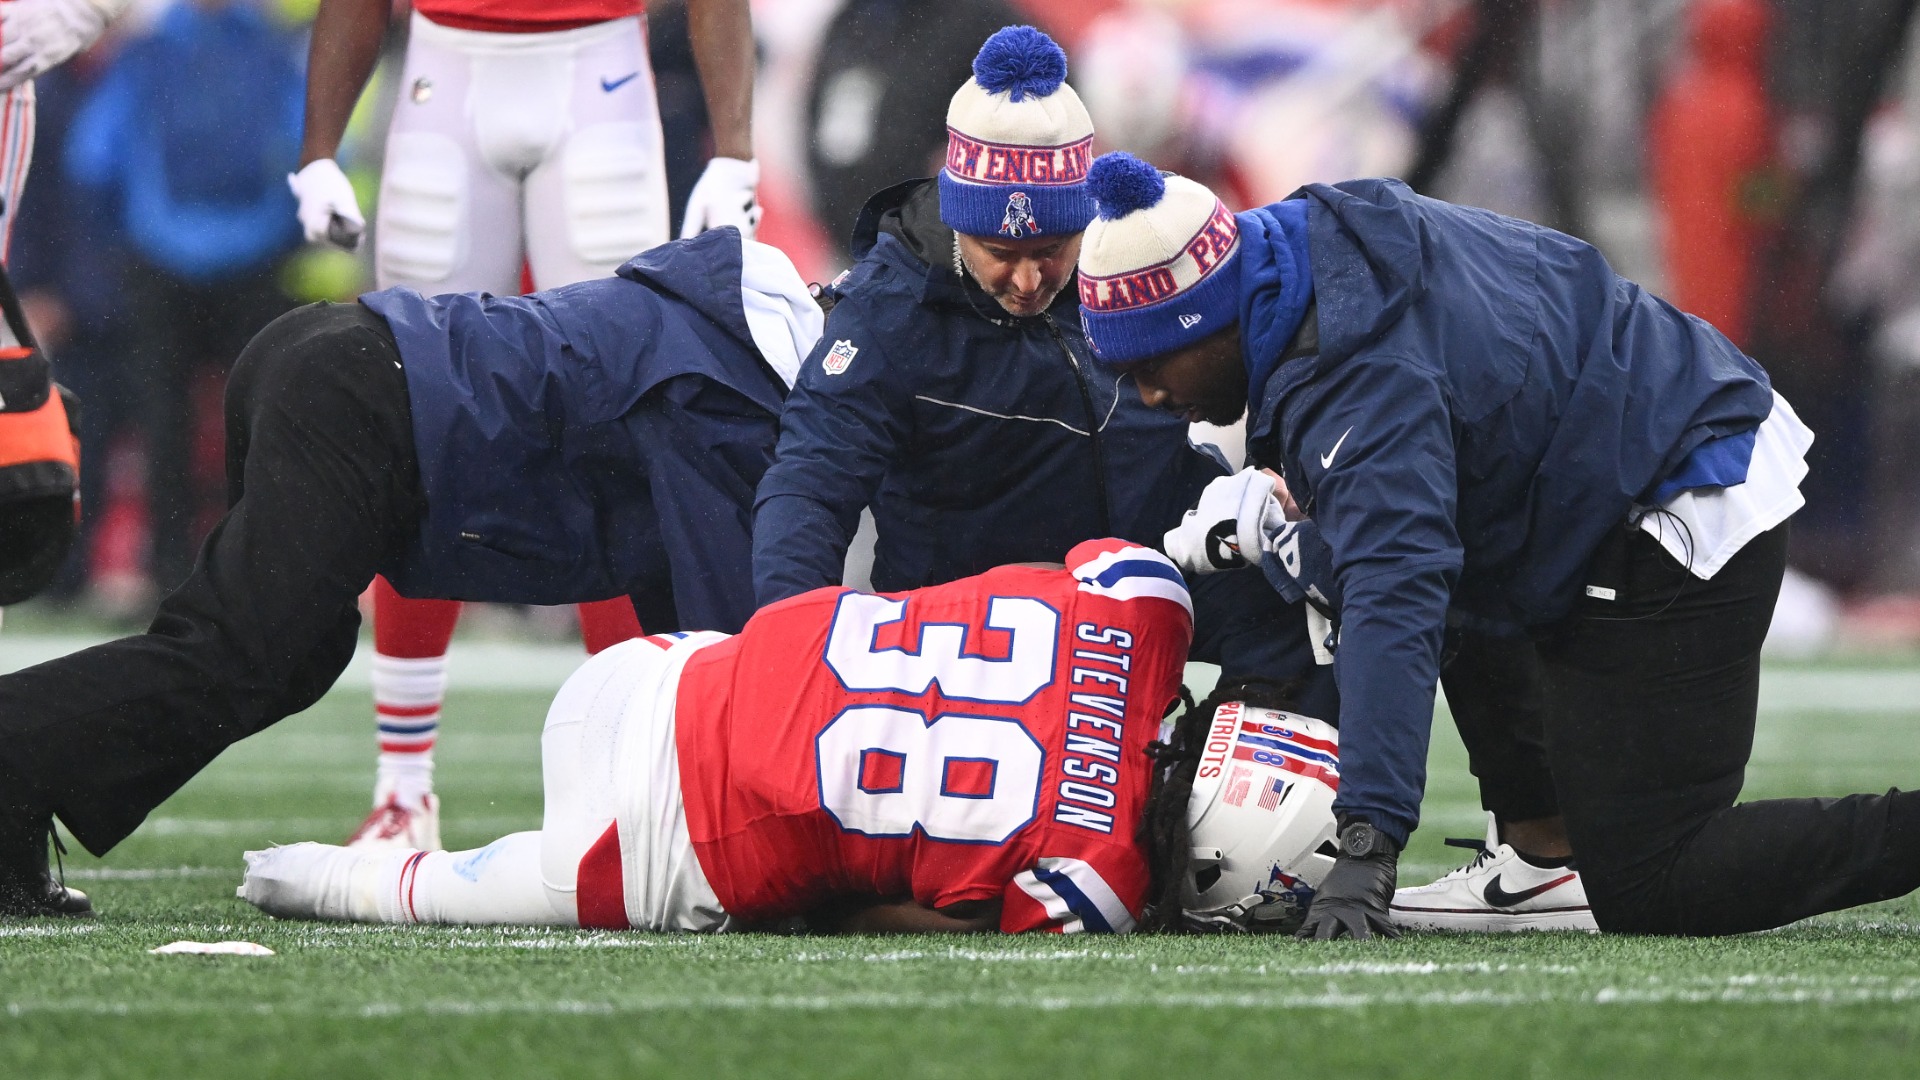 NFL’s Competition Committee Officially Proposes Ban On
‘Hip-Drop’ Tackles